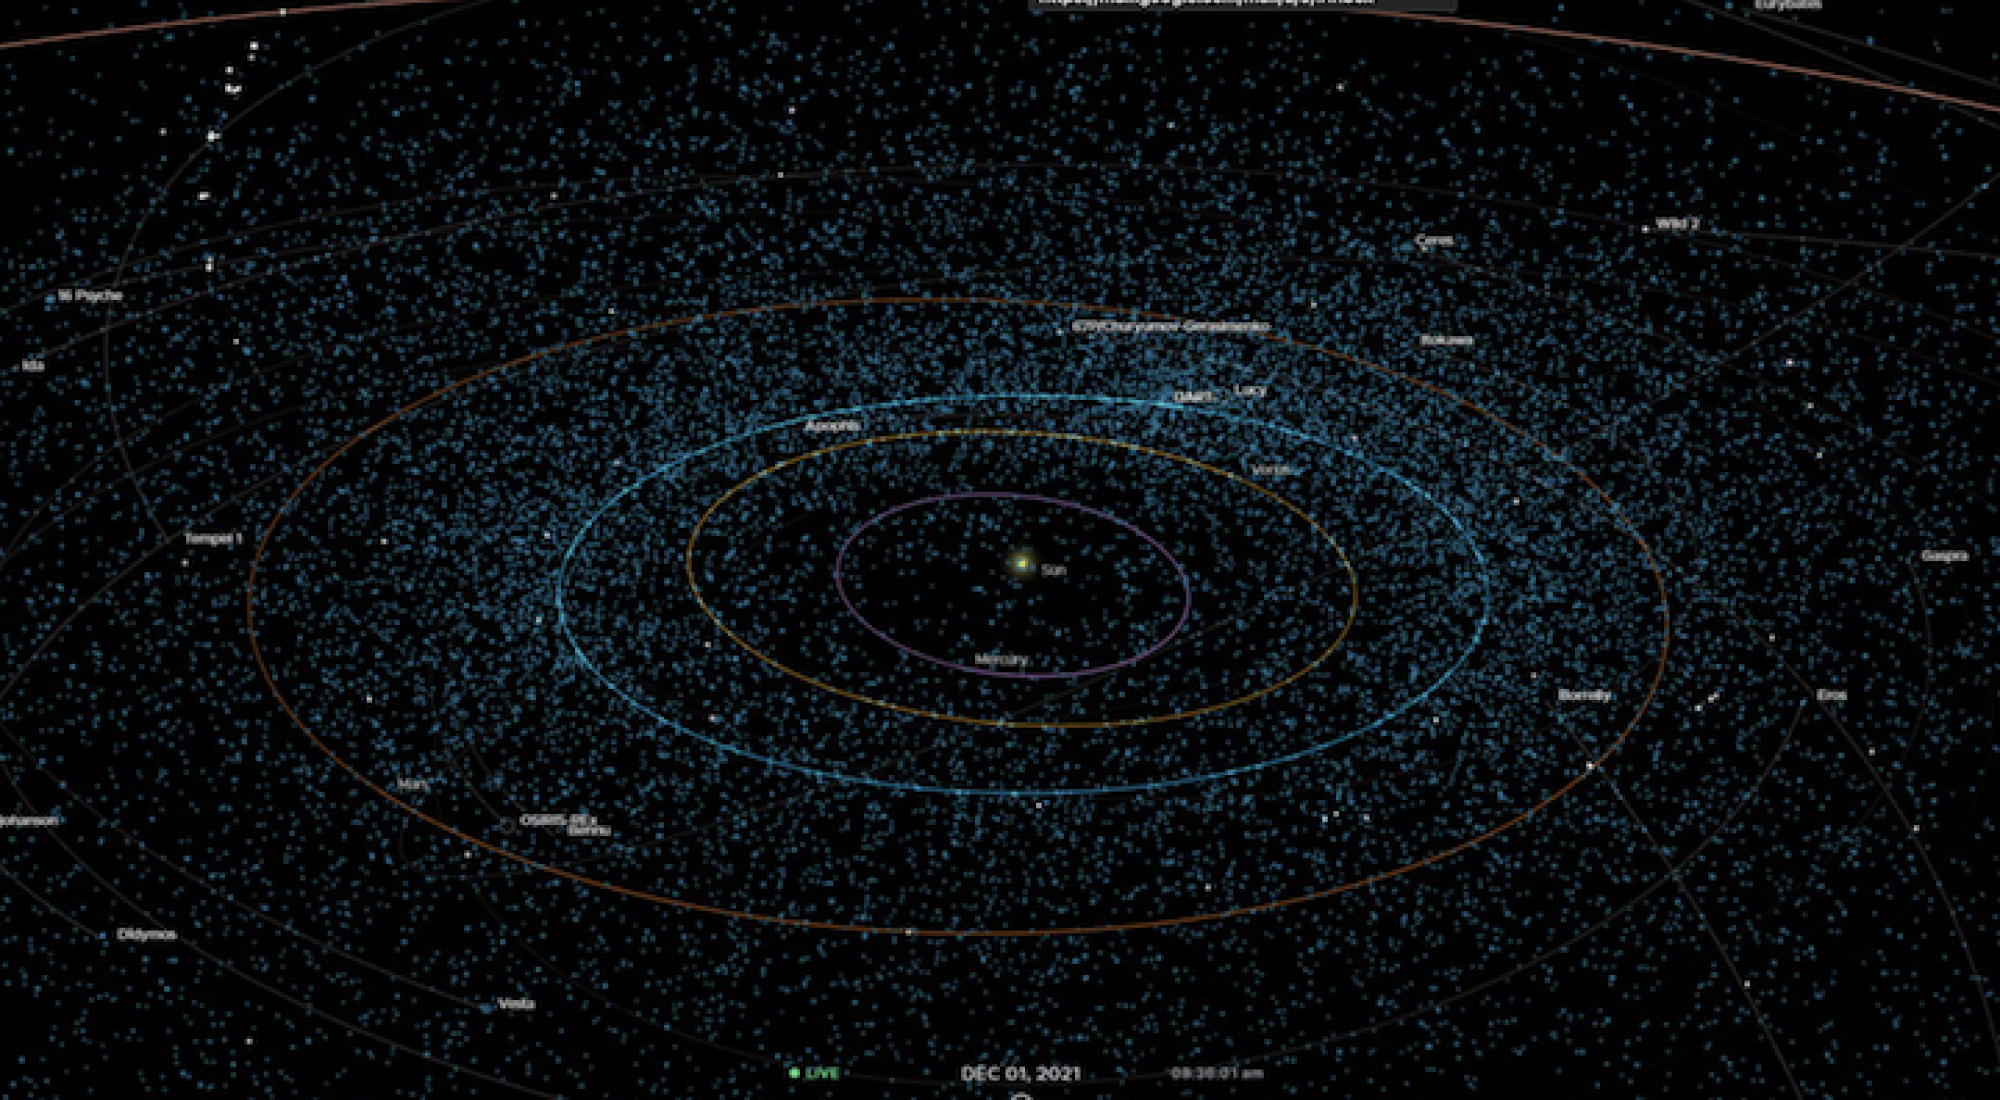 A visualization showing hundreds of near-Earth asteroids in our solar system (blue dots). Earth's orbit around the sun is also shown in blue.